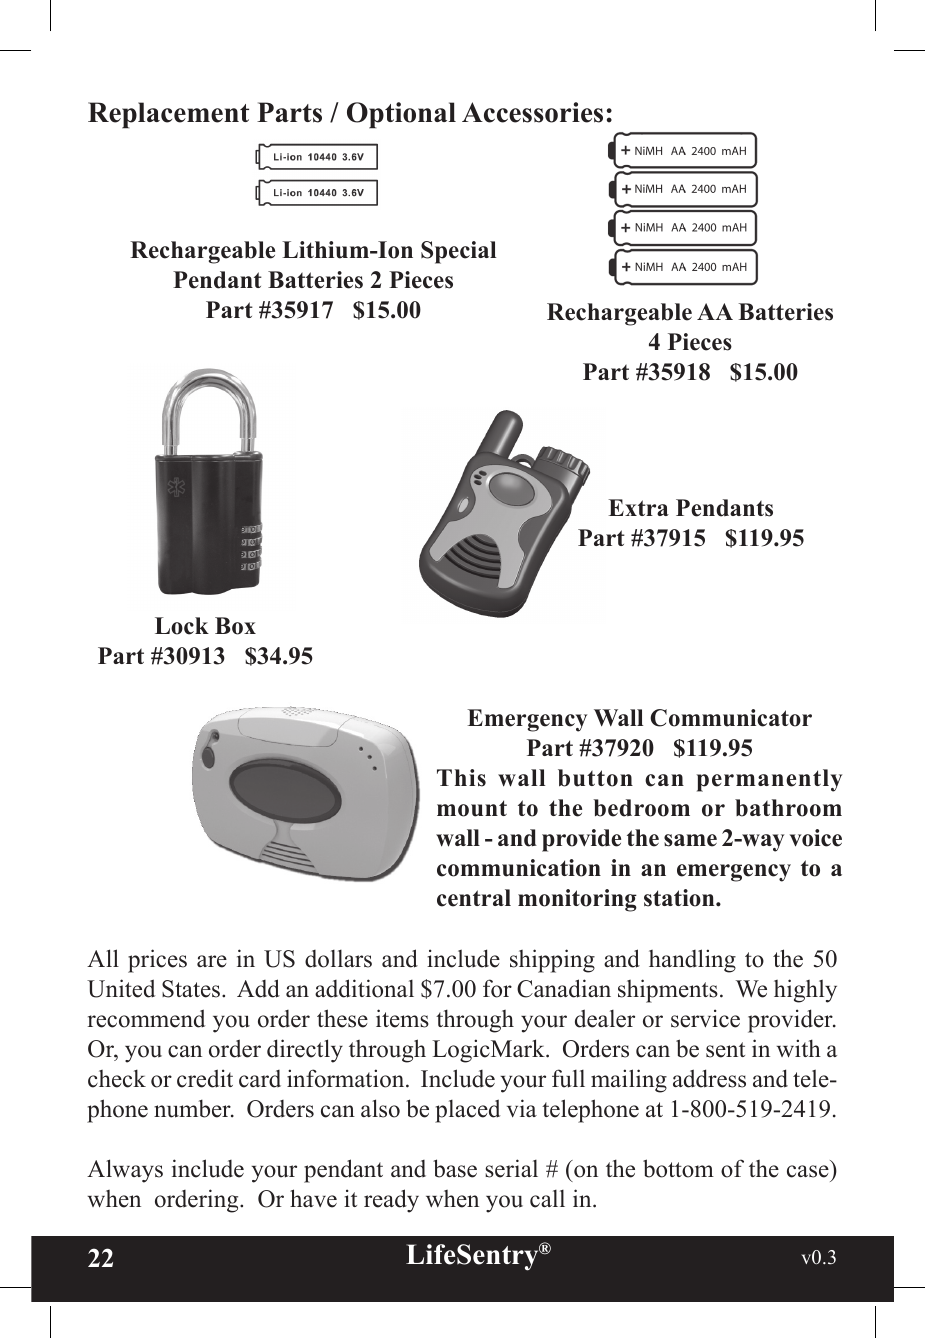 22 LifeSentry®                                                           v0.3   Replacement Parts / Optional Accessories:Lock BoxPart #30913   $34.95Rechargeable Lithium-Ion Special Pendant Batteries 2 PiecesPart #35917   $15.00 Rechargeable AA Batteries4 PiecesPart #35918   $15.00Extra PendantsPart #37915   $119.95All prices are in US dollars and include shipping and  handling to the  50 United States.  Add an additional $7.00 for Canadian shipments.  We highly recommend you order these items through your dealer or service provider.  Or, you can order directly through LogicMark.  Orders can be sent in with a check or credit card information.  Include your full mailing address and tele-phone number.  Orders can also be placed via telephone at 1-800-519-2419.Always include your pendant and base serial # (on the bottom of the case) when  ordering.  Or have it ready when you call in. Emergency Wall CommunicatorPart #37920   $119.95This  wall  button  can  permanently mount  to  the  bedroom  or  bathroom wall - and provide the same 2-way voice communication  in an  emergency  to  a central monitoring station.